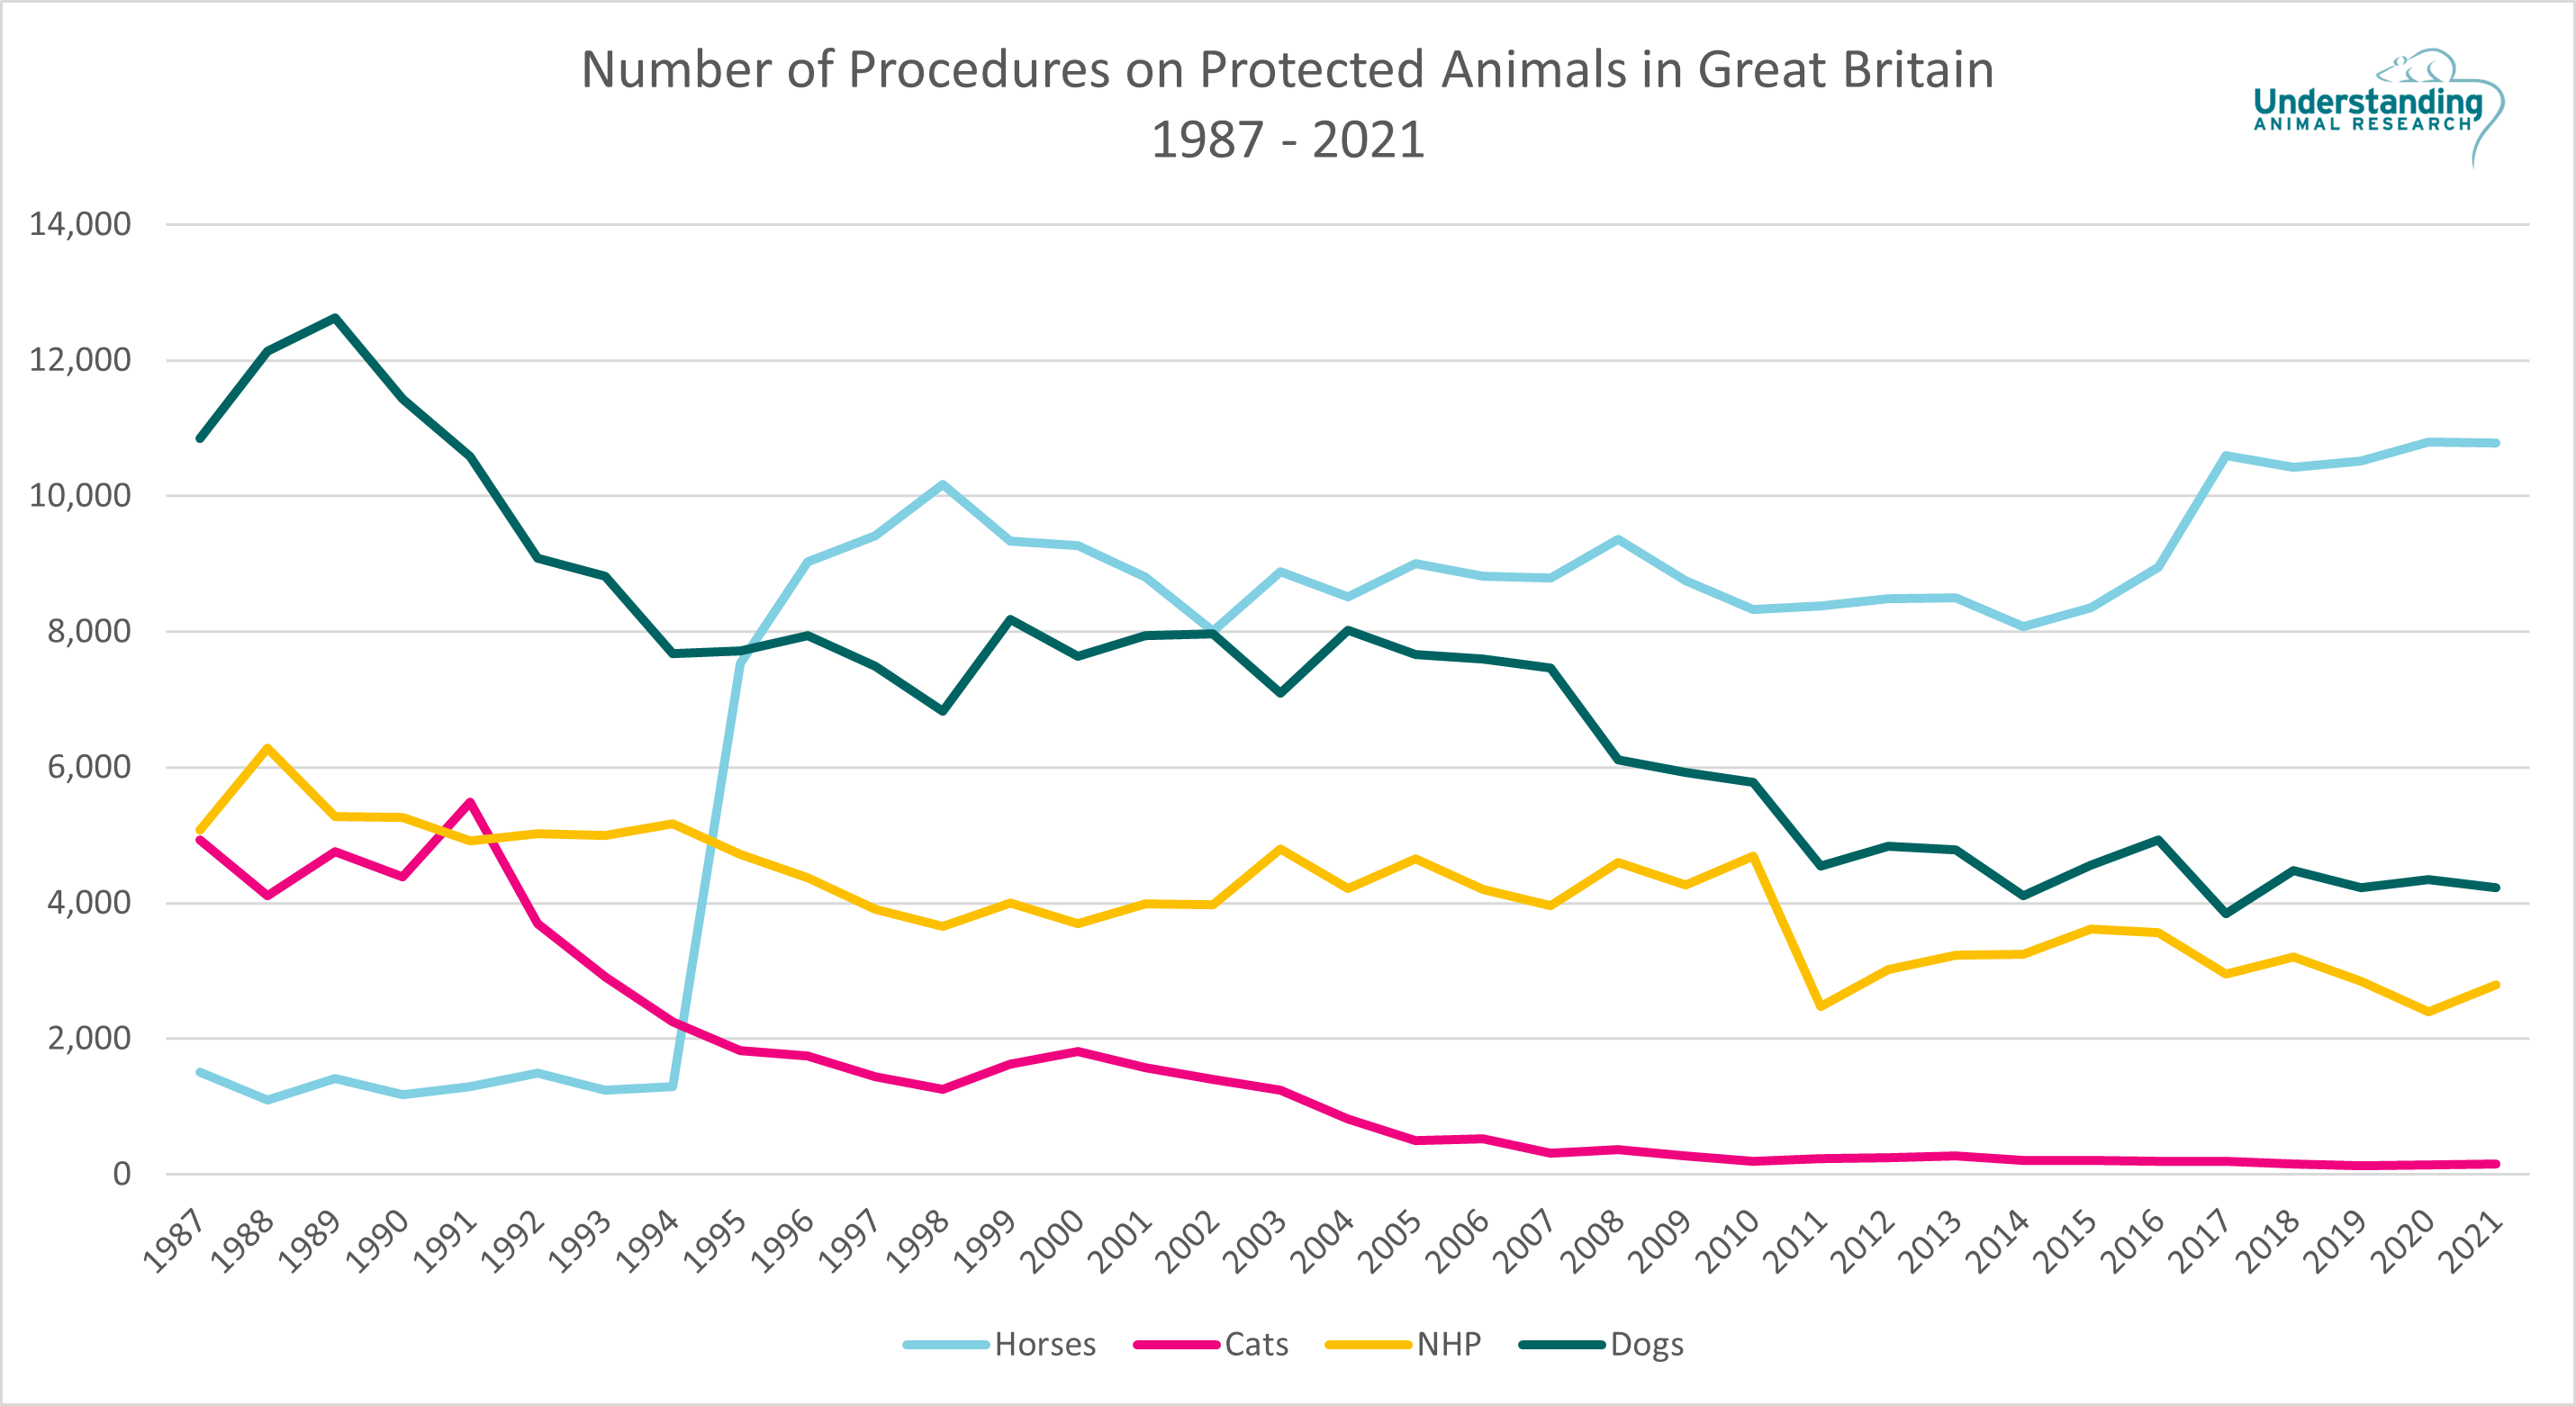 Number of Procedures on Protected Animals in Great Britain 1987-2021.png